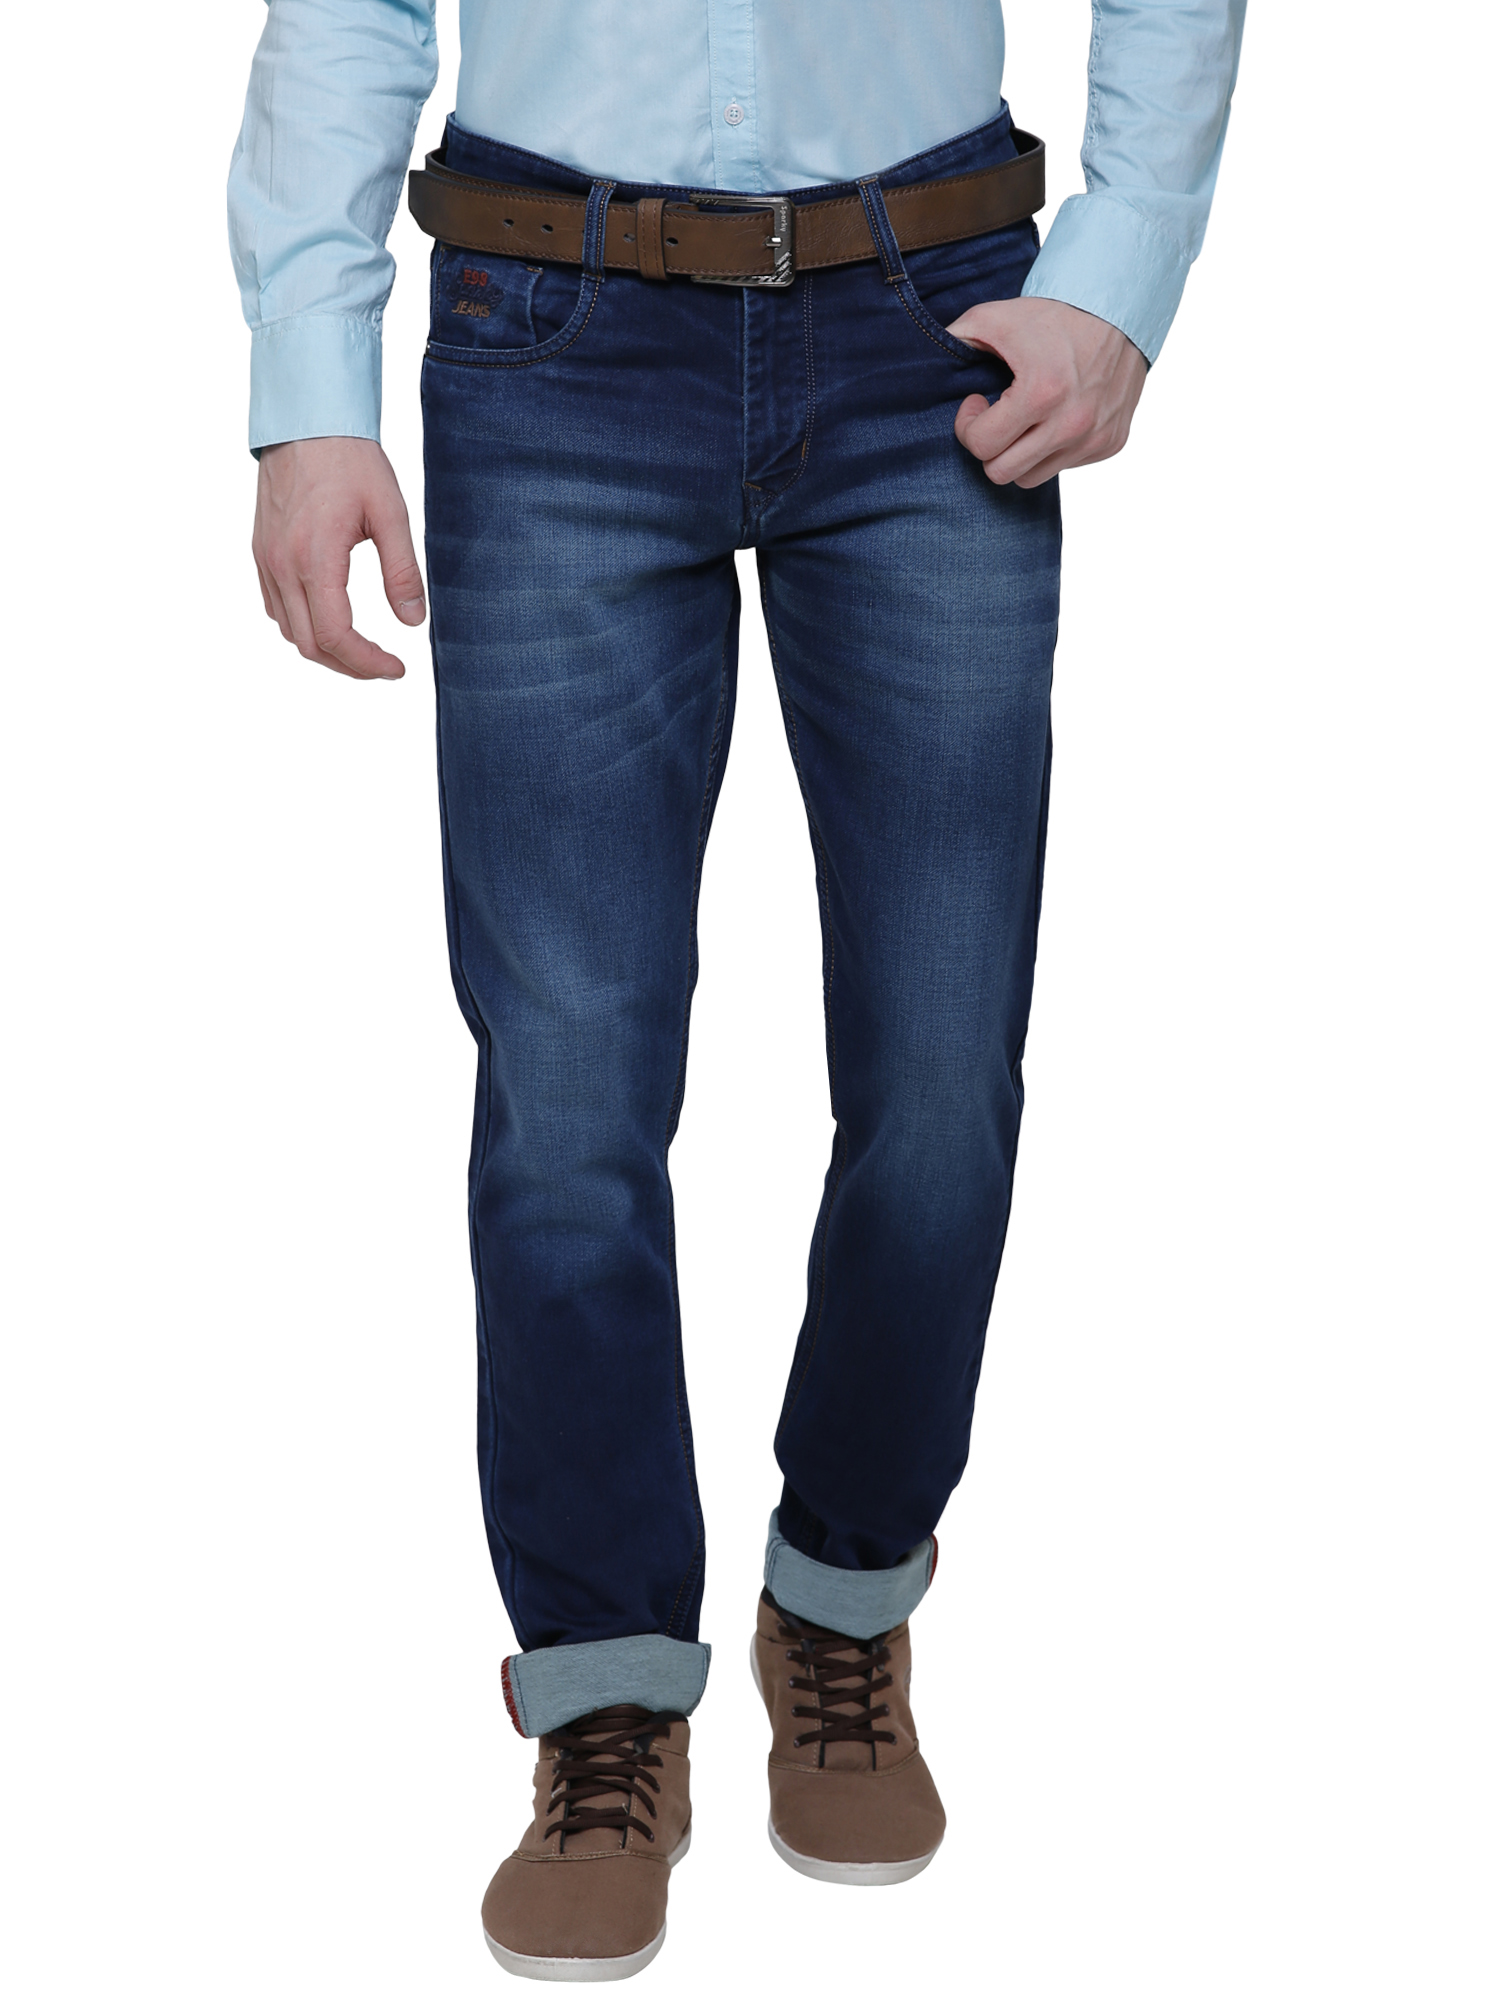 Sparky Ahead of The Fashion Curve Mens Jeans Blue1054